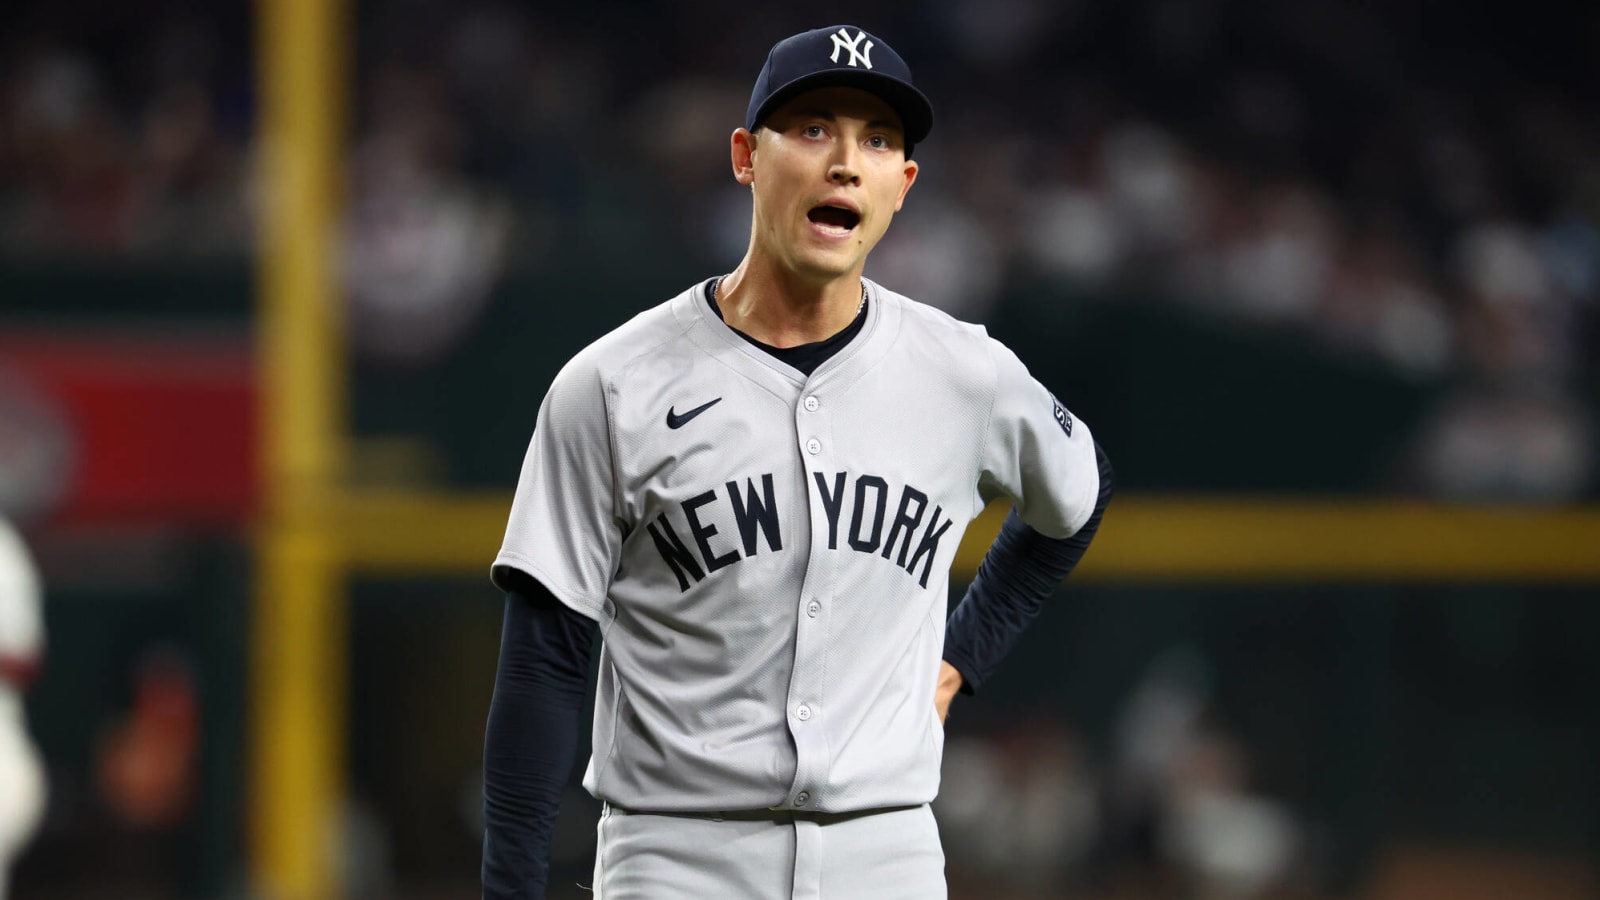 The Yankees are continuing to see underrated reliever flourish